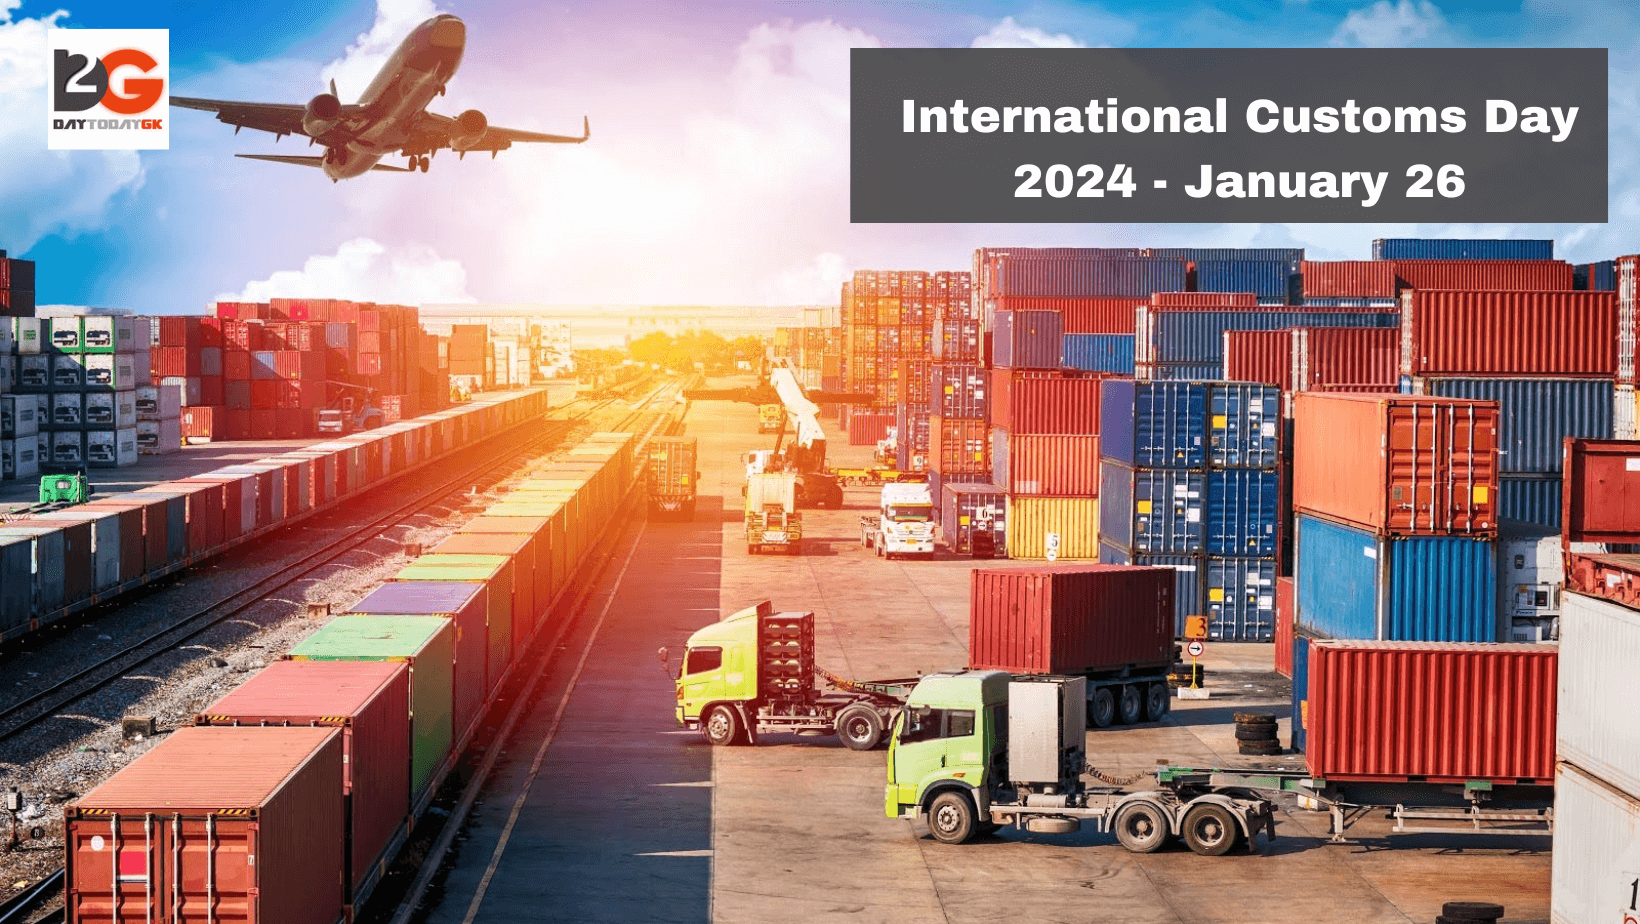 International Customs Day 2024 is observed on January 26